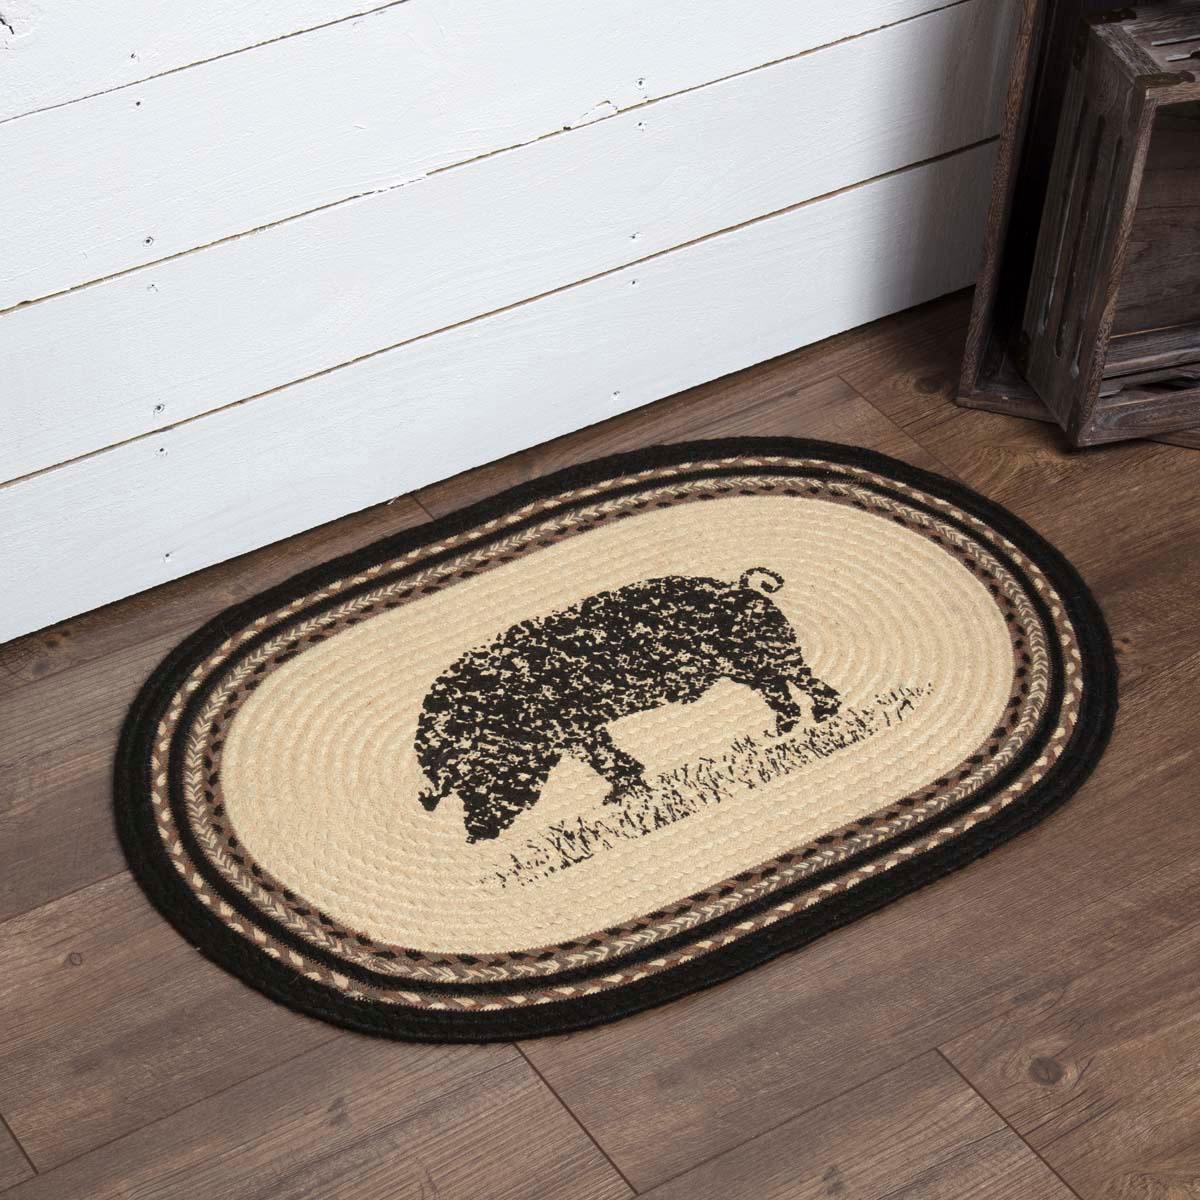 Sawyer Mill Charcoal Pig Jute Braided Rug Oval 20"x30" with Rug Pad VHC Brands - The Fox Decor